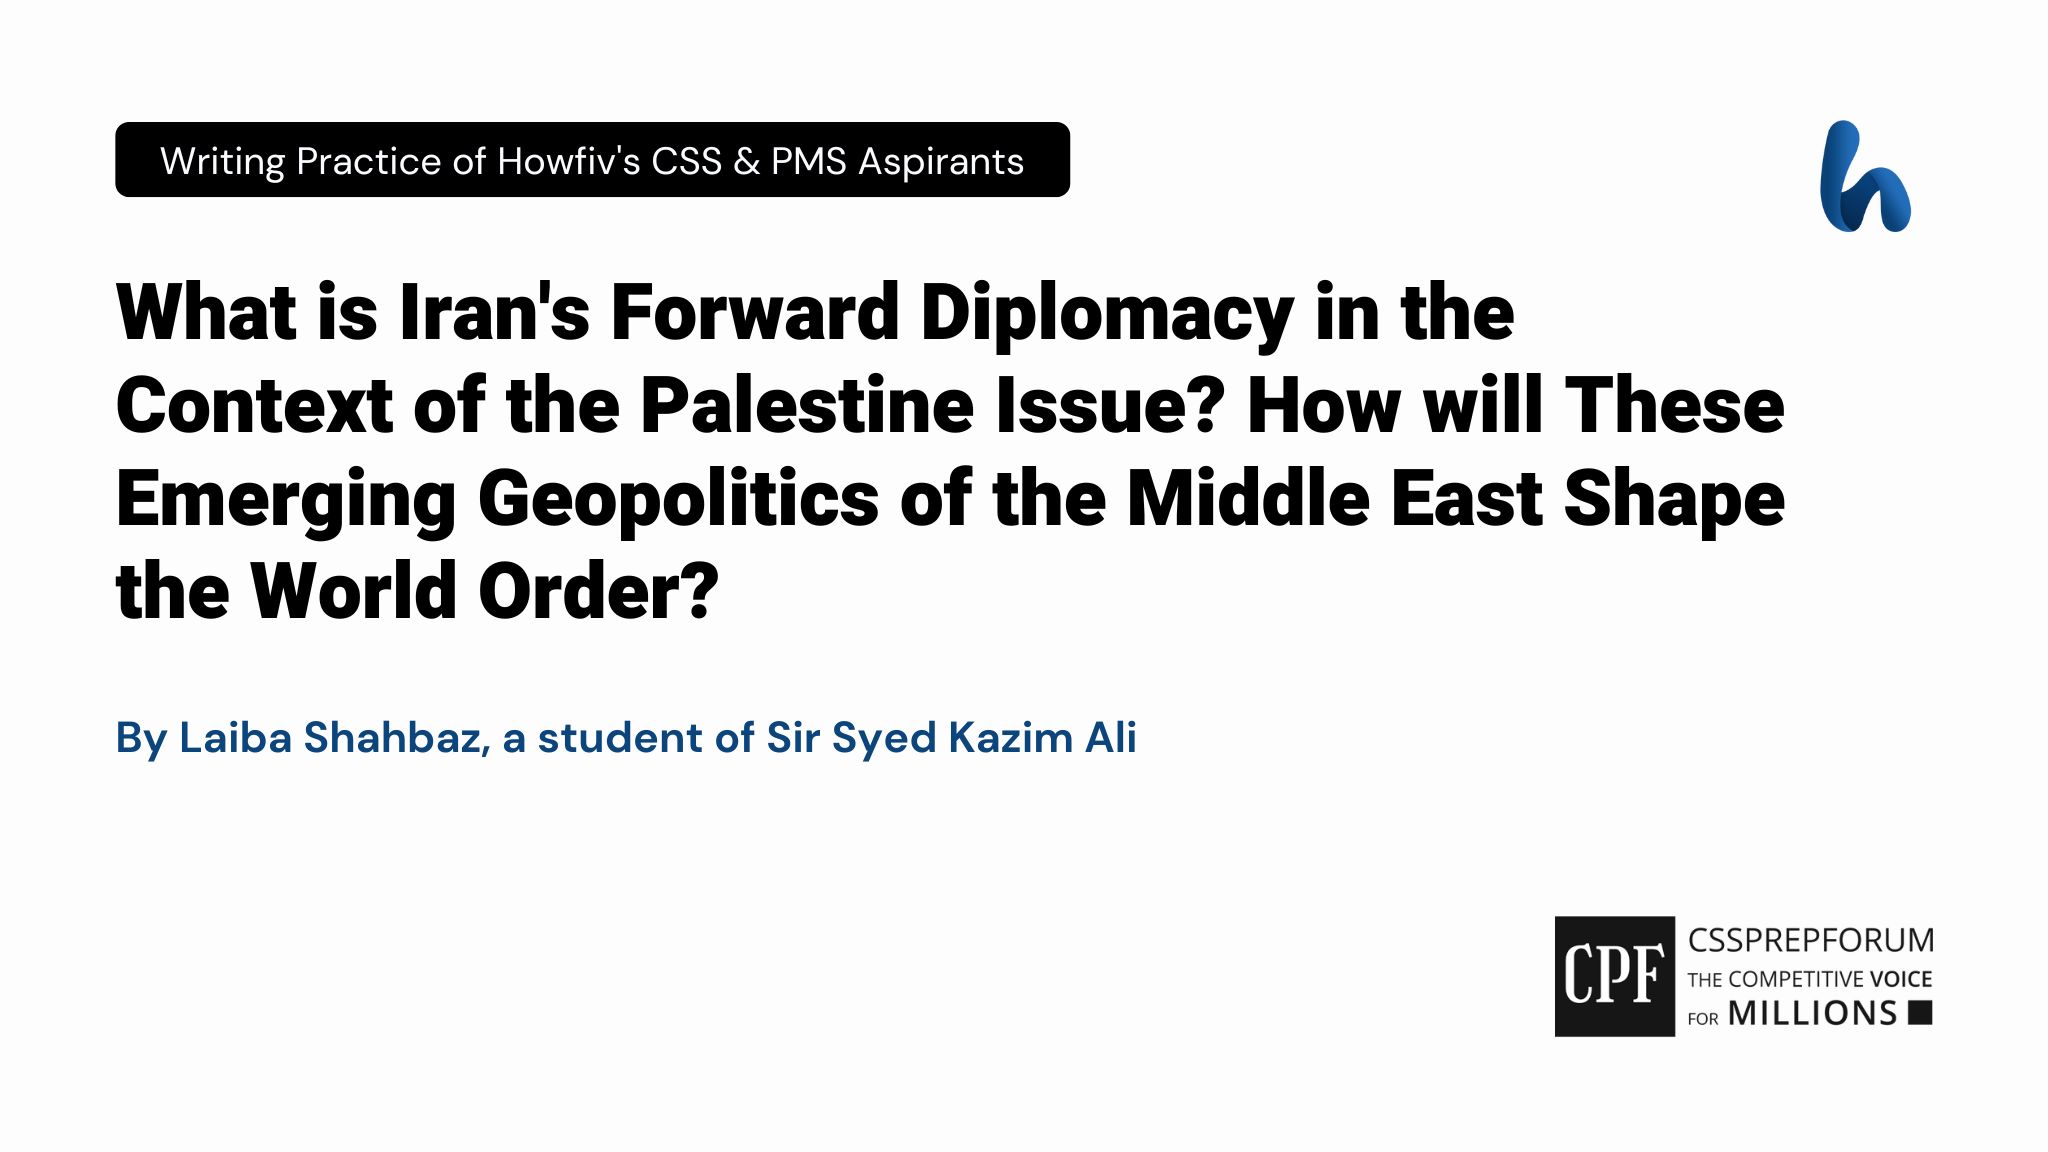 Iran's Forward Diplomacy in Palestine Context By Laiba Shahbaz